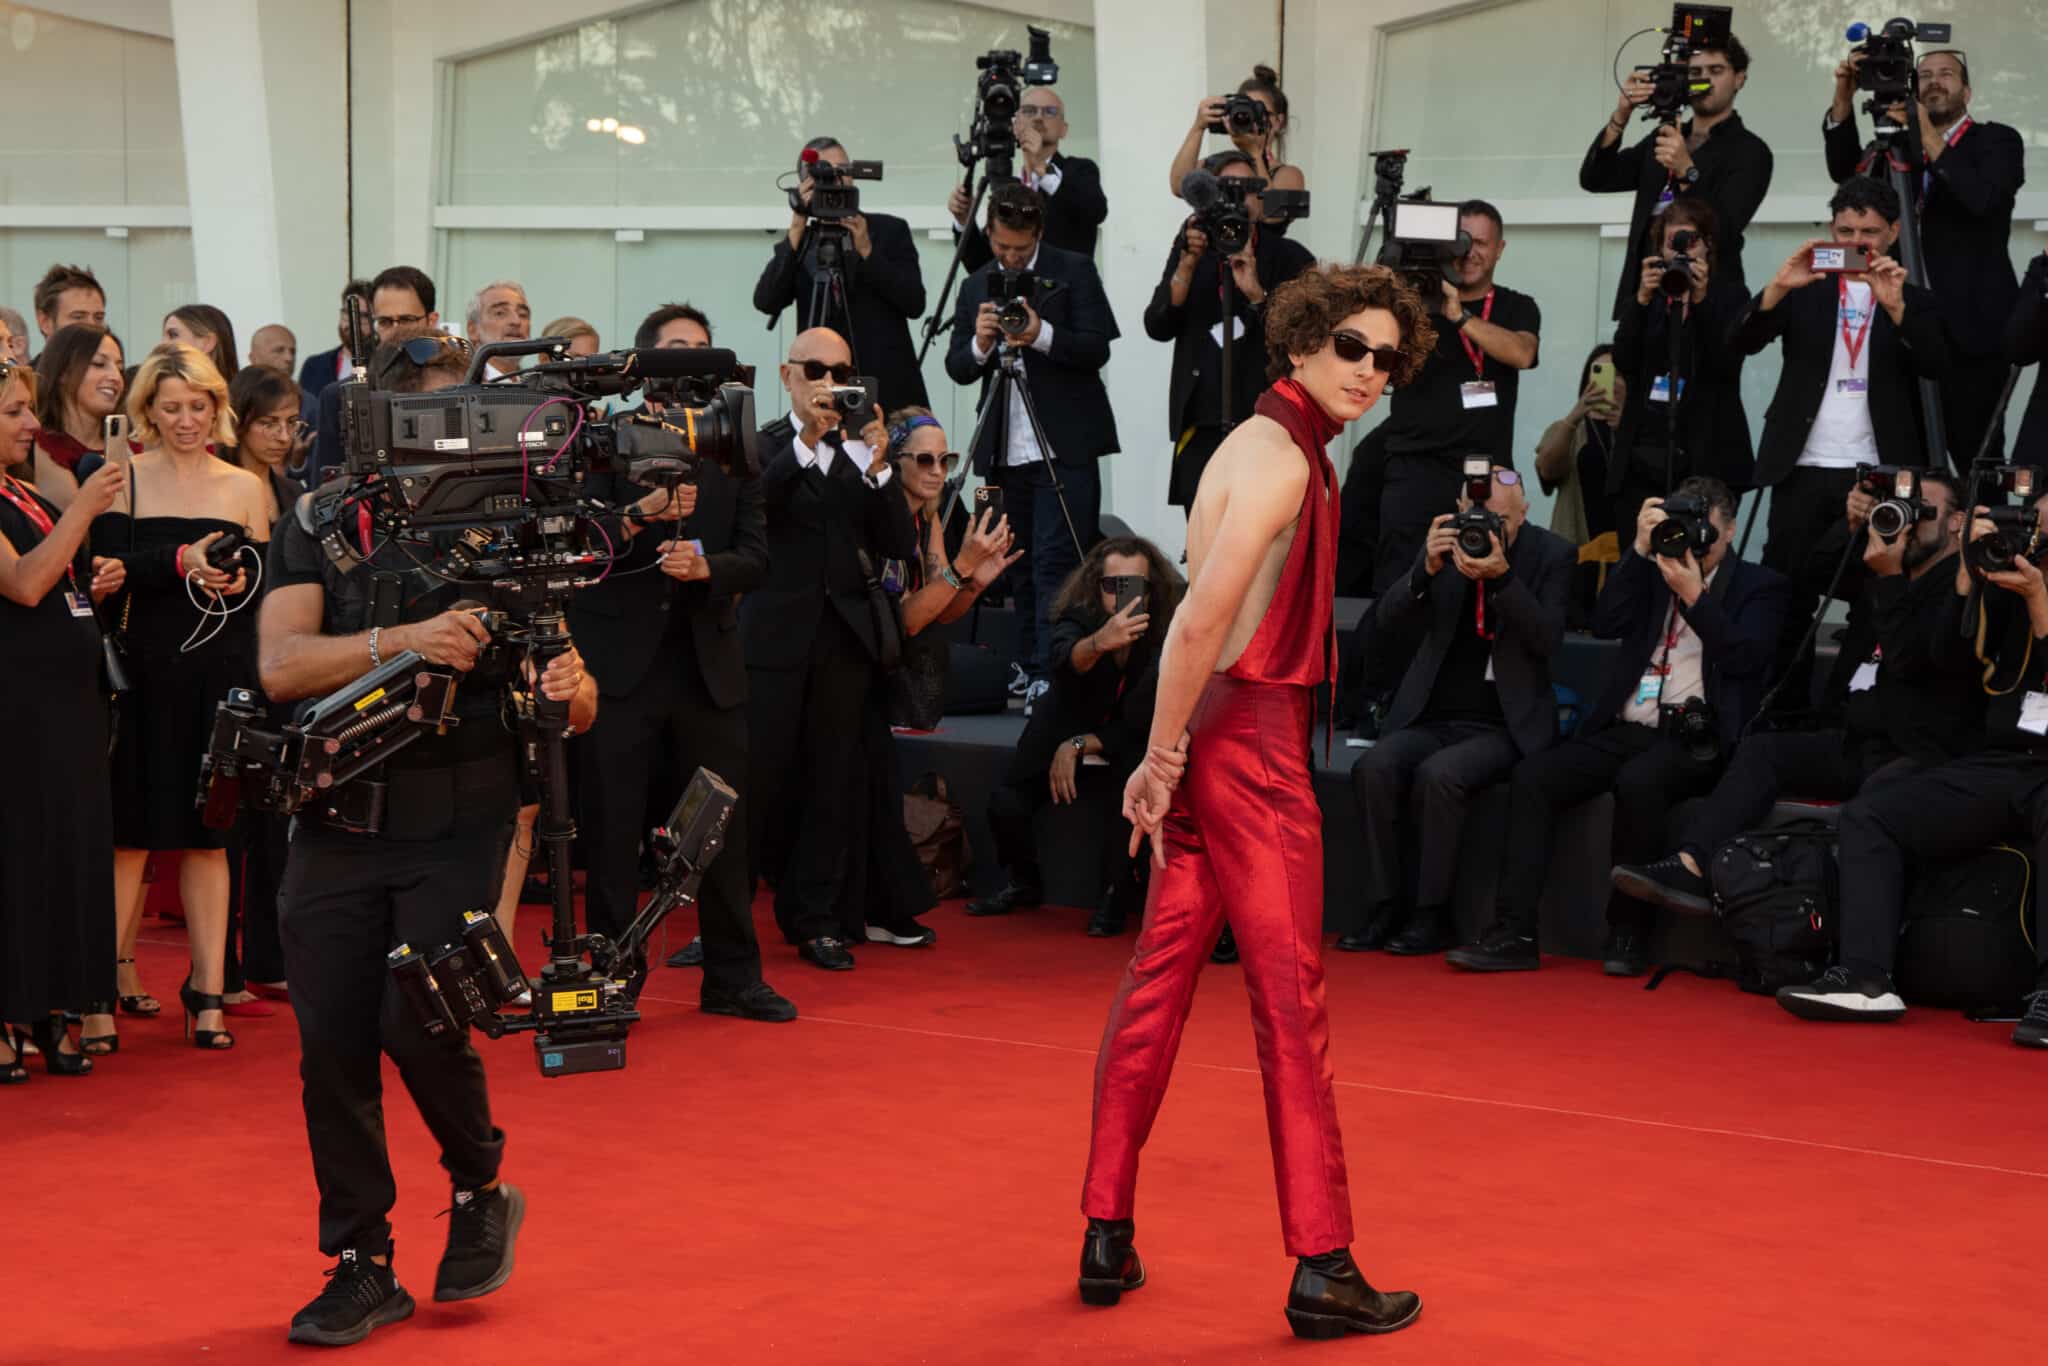 Timothée Chalamet made a splash at the Venice Film Festival by standing with his back in the air